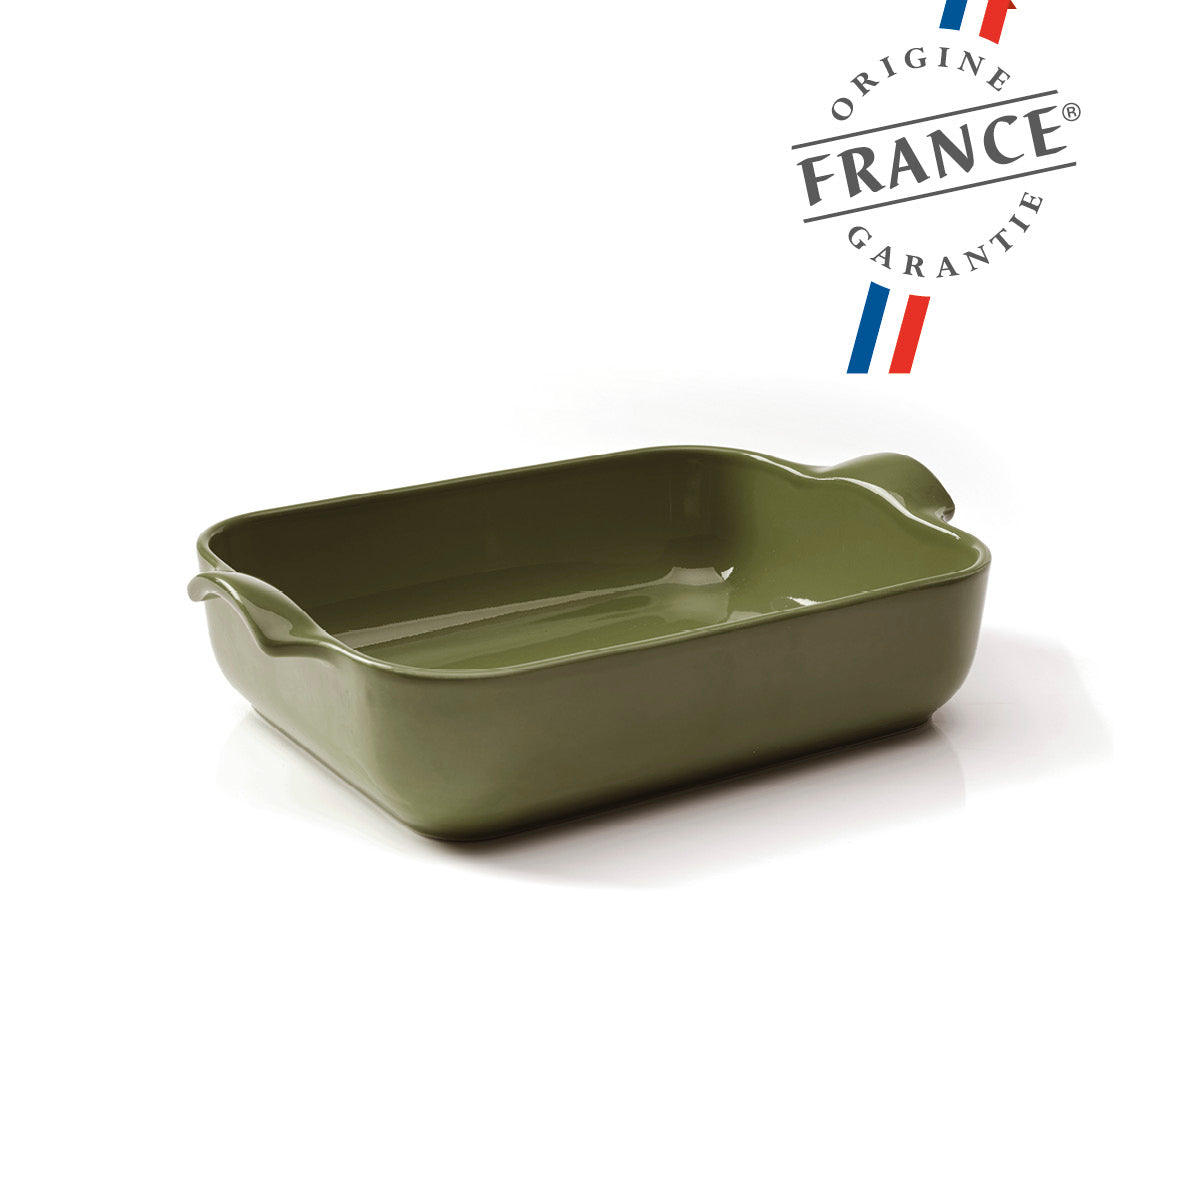 Ceramic oven dish - Made in France - 5L - 6-8 people Green